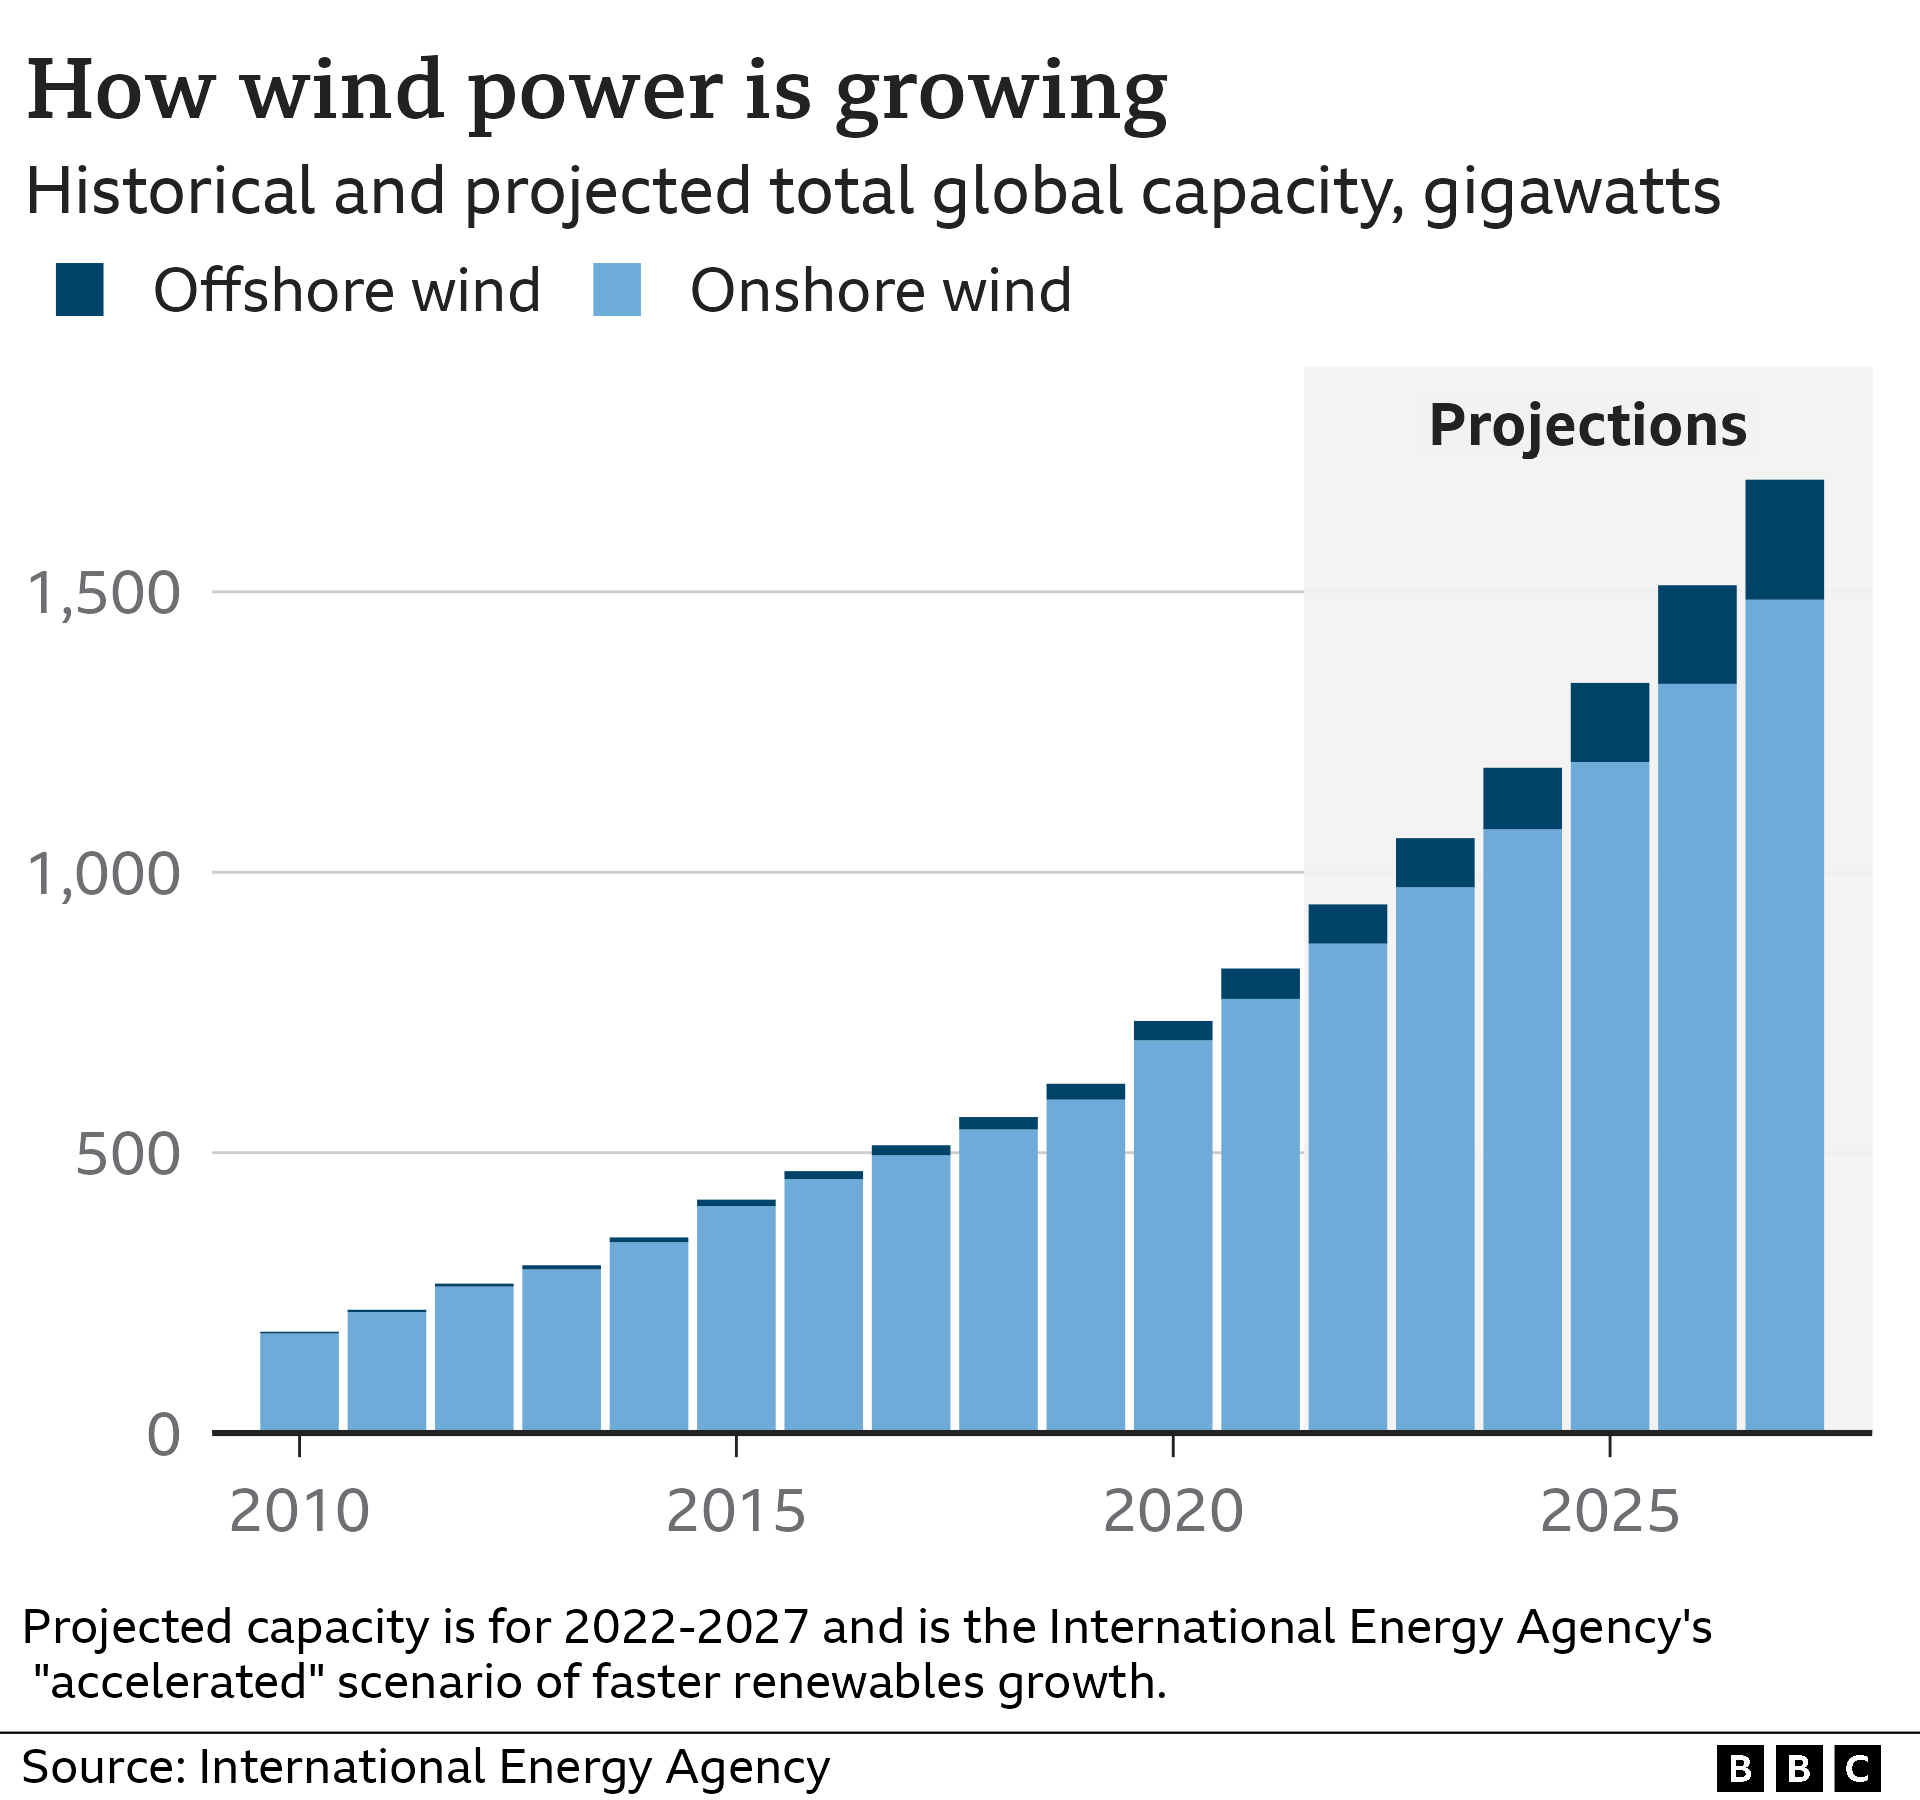 Chart showing the recent and projected future growth of wind power capacity - from under 200 gigawatts in 2010 to a projected 1700 gigawatts in 2027.